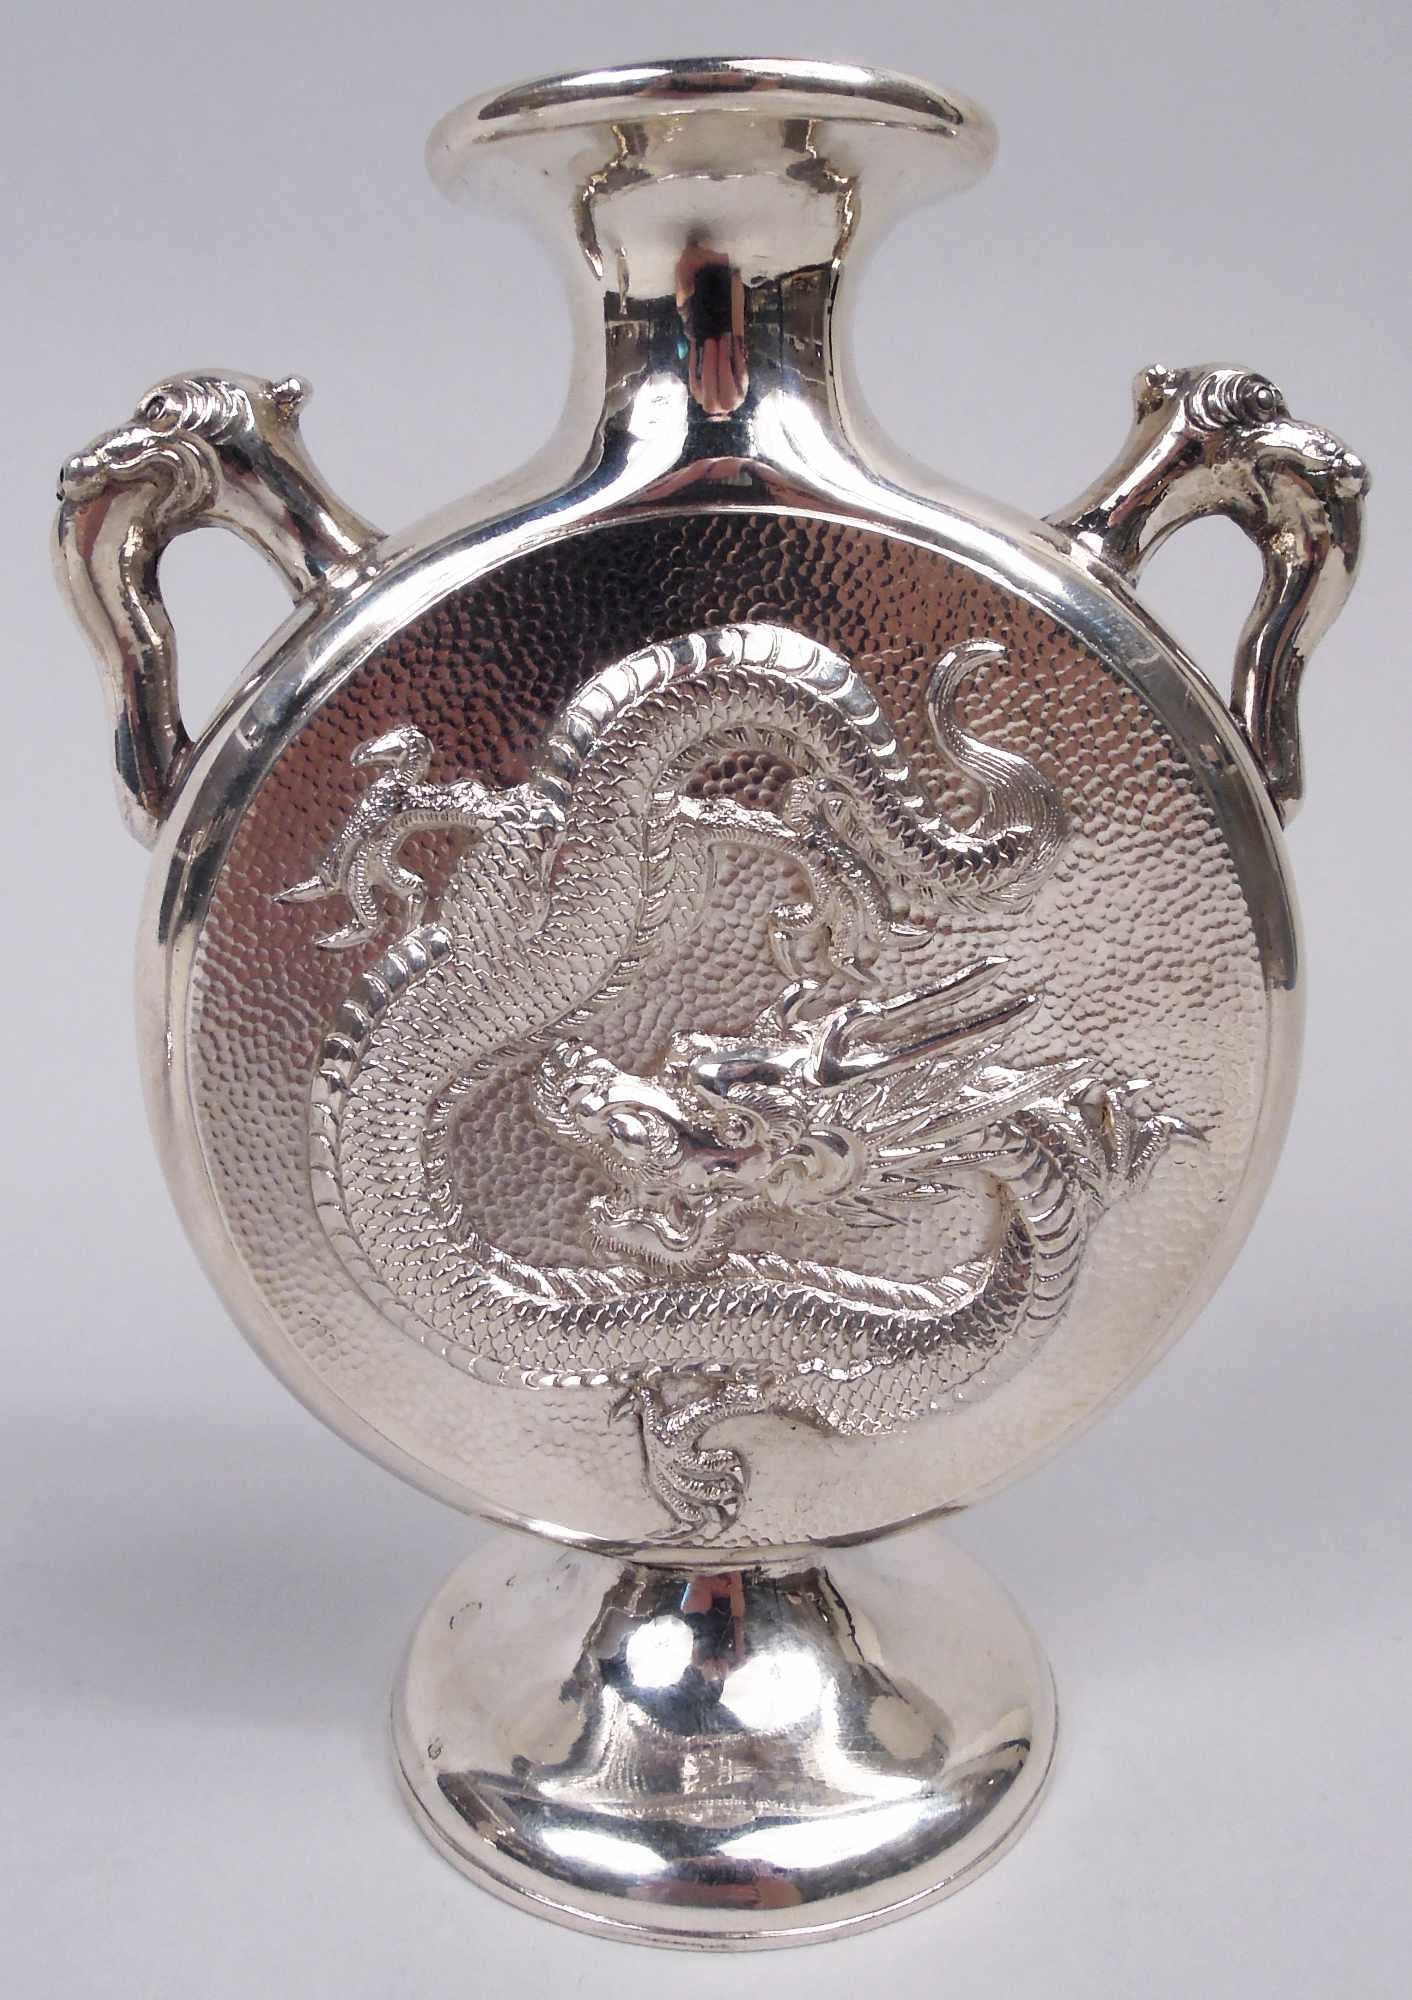 Pair of Chinese export silver vases, ca 1910. Each: Flat and round moon body on domed foot; animal-head handles mounted to shoulder. On front and back is chased dragon—a horned and taloned serpentine serpent on hand-hammered ground. Marked Wang Hing